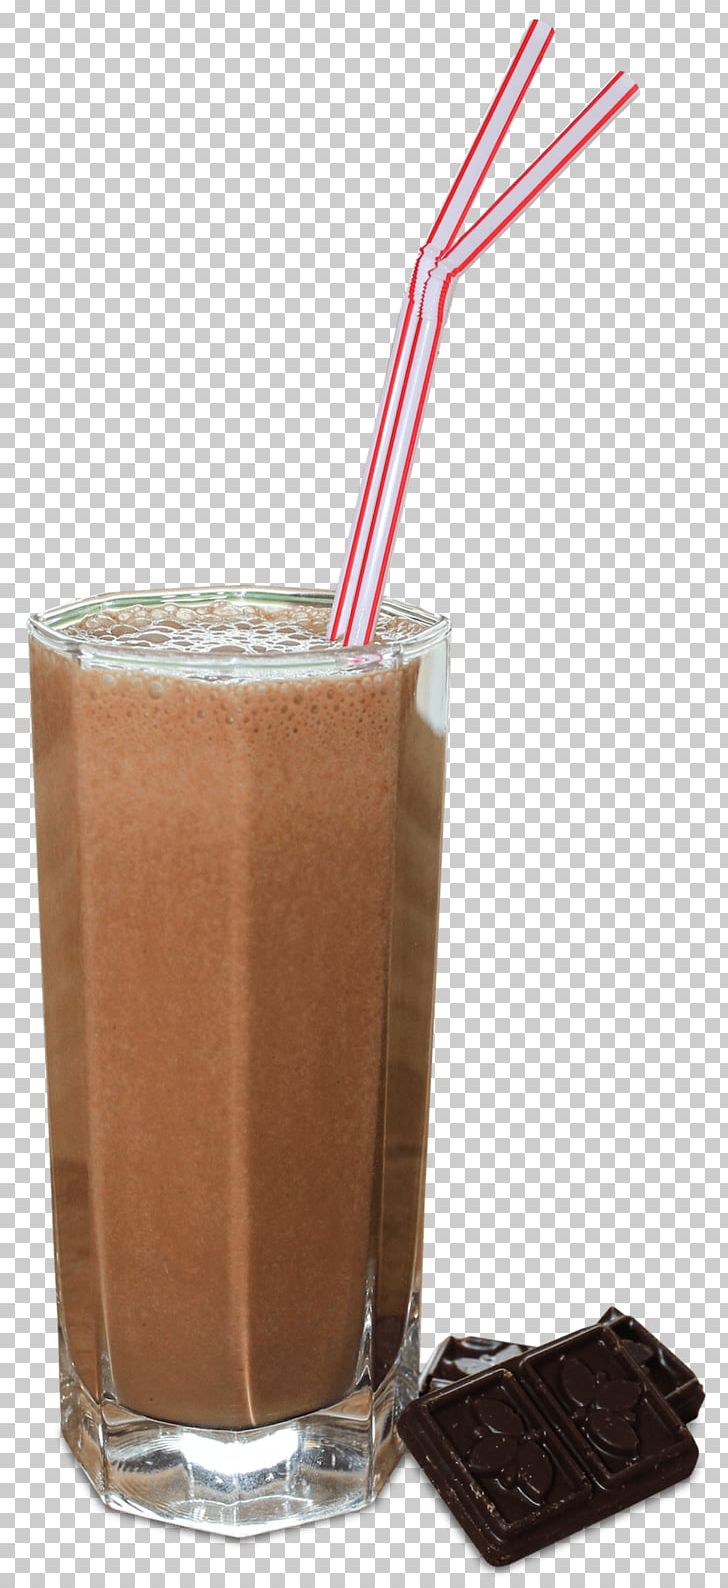 Milkshake Smoothie Chocolate Health Juice PNG, Clipart, Agave, Batida, Cacao, Chocolate, Cocoa Bean Free PNG Download